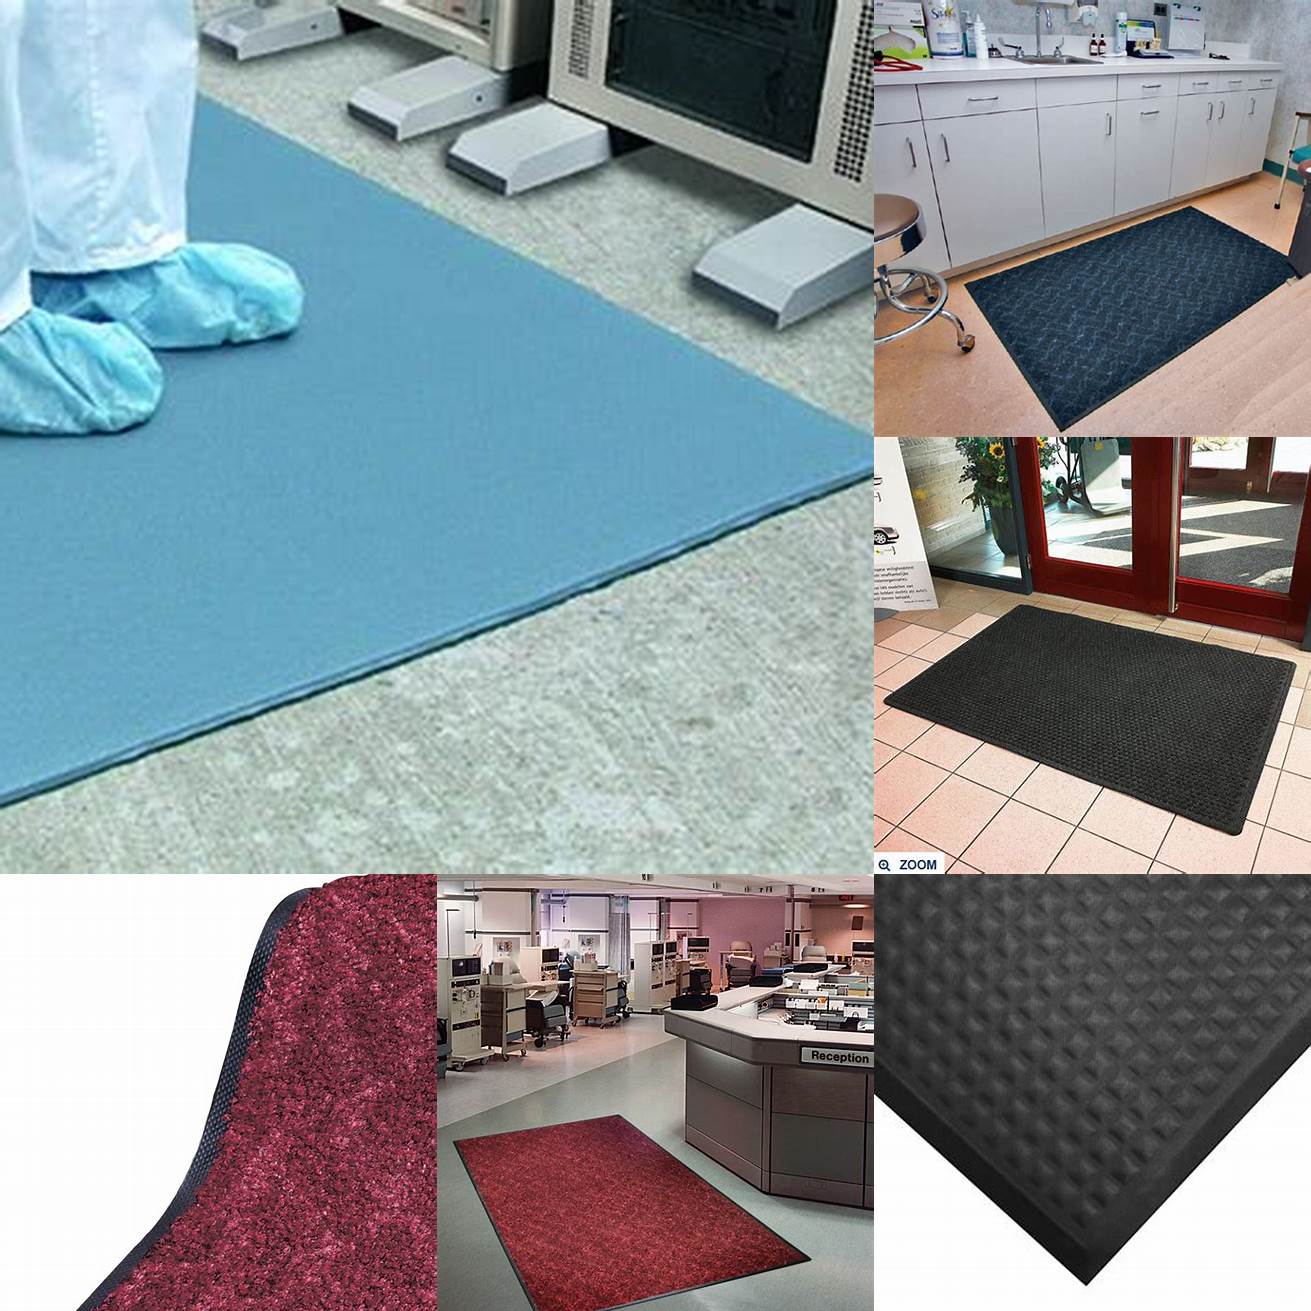 4 Anti-microbial Mats These mats are designed to prevent the growth of bacteria and fungi making them ideal for commercial kitchens